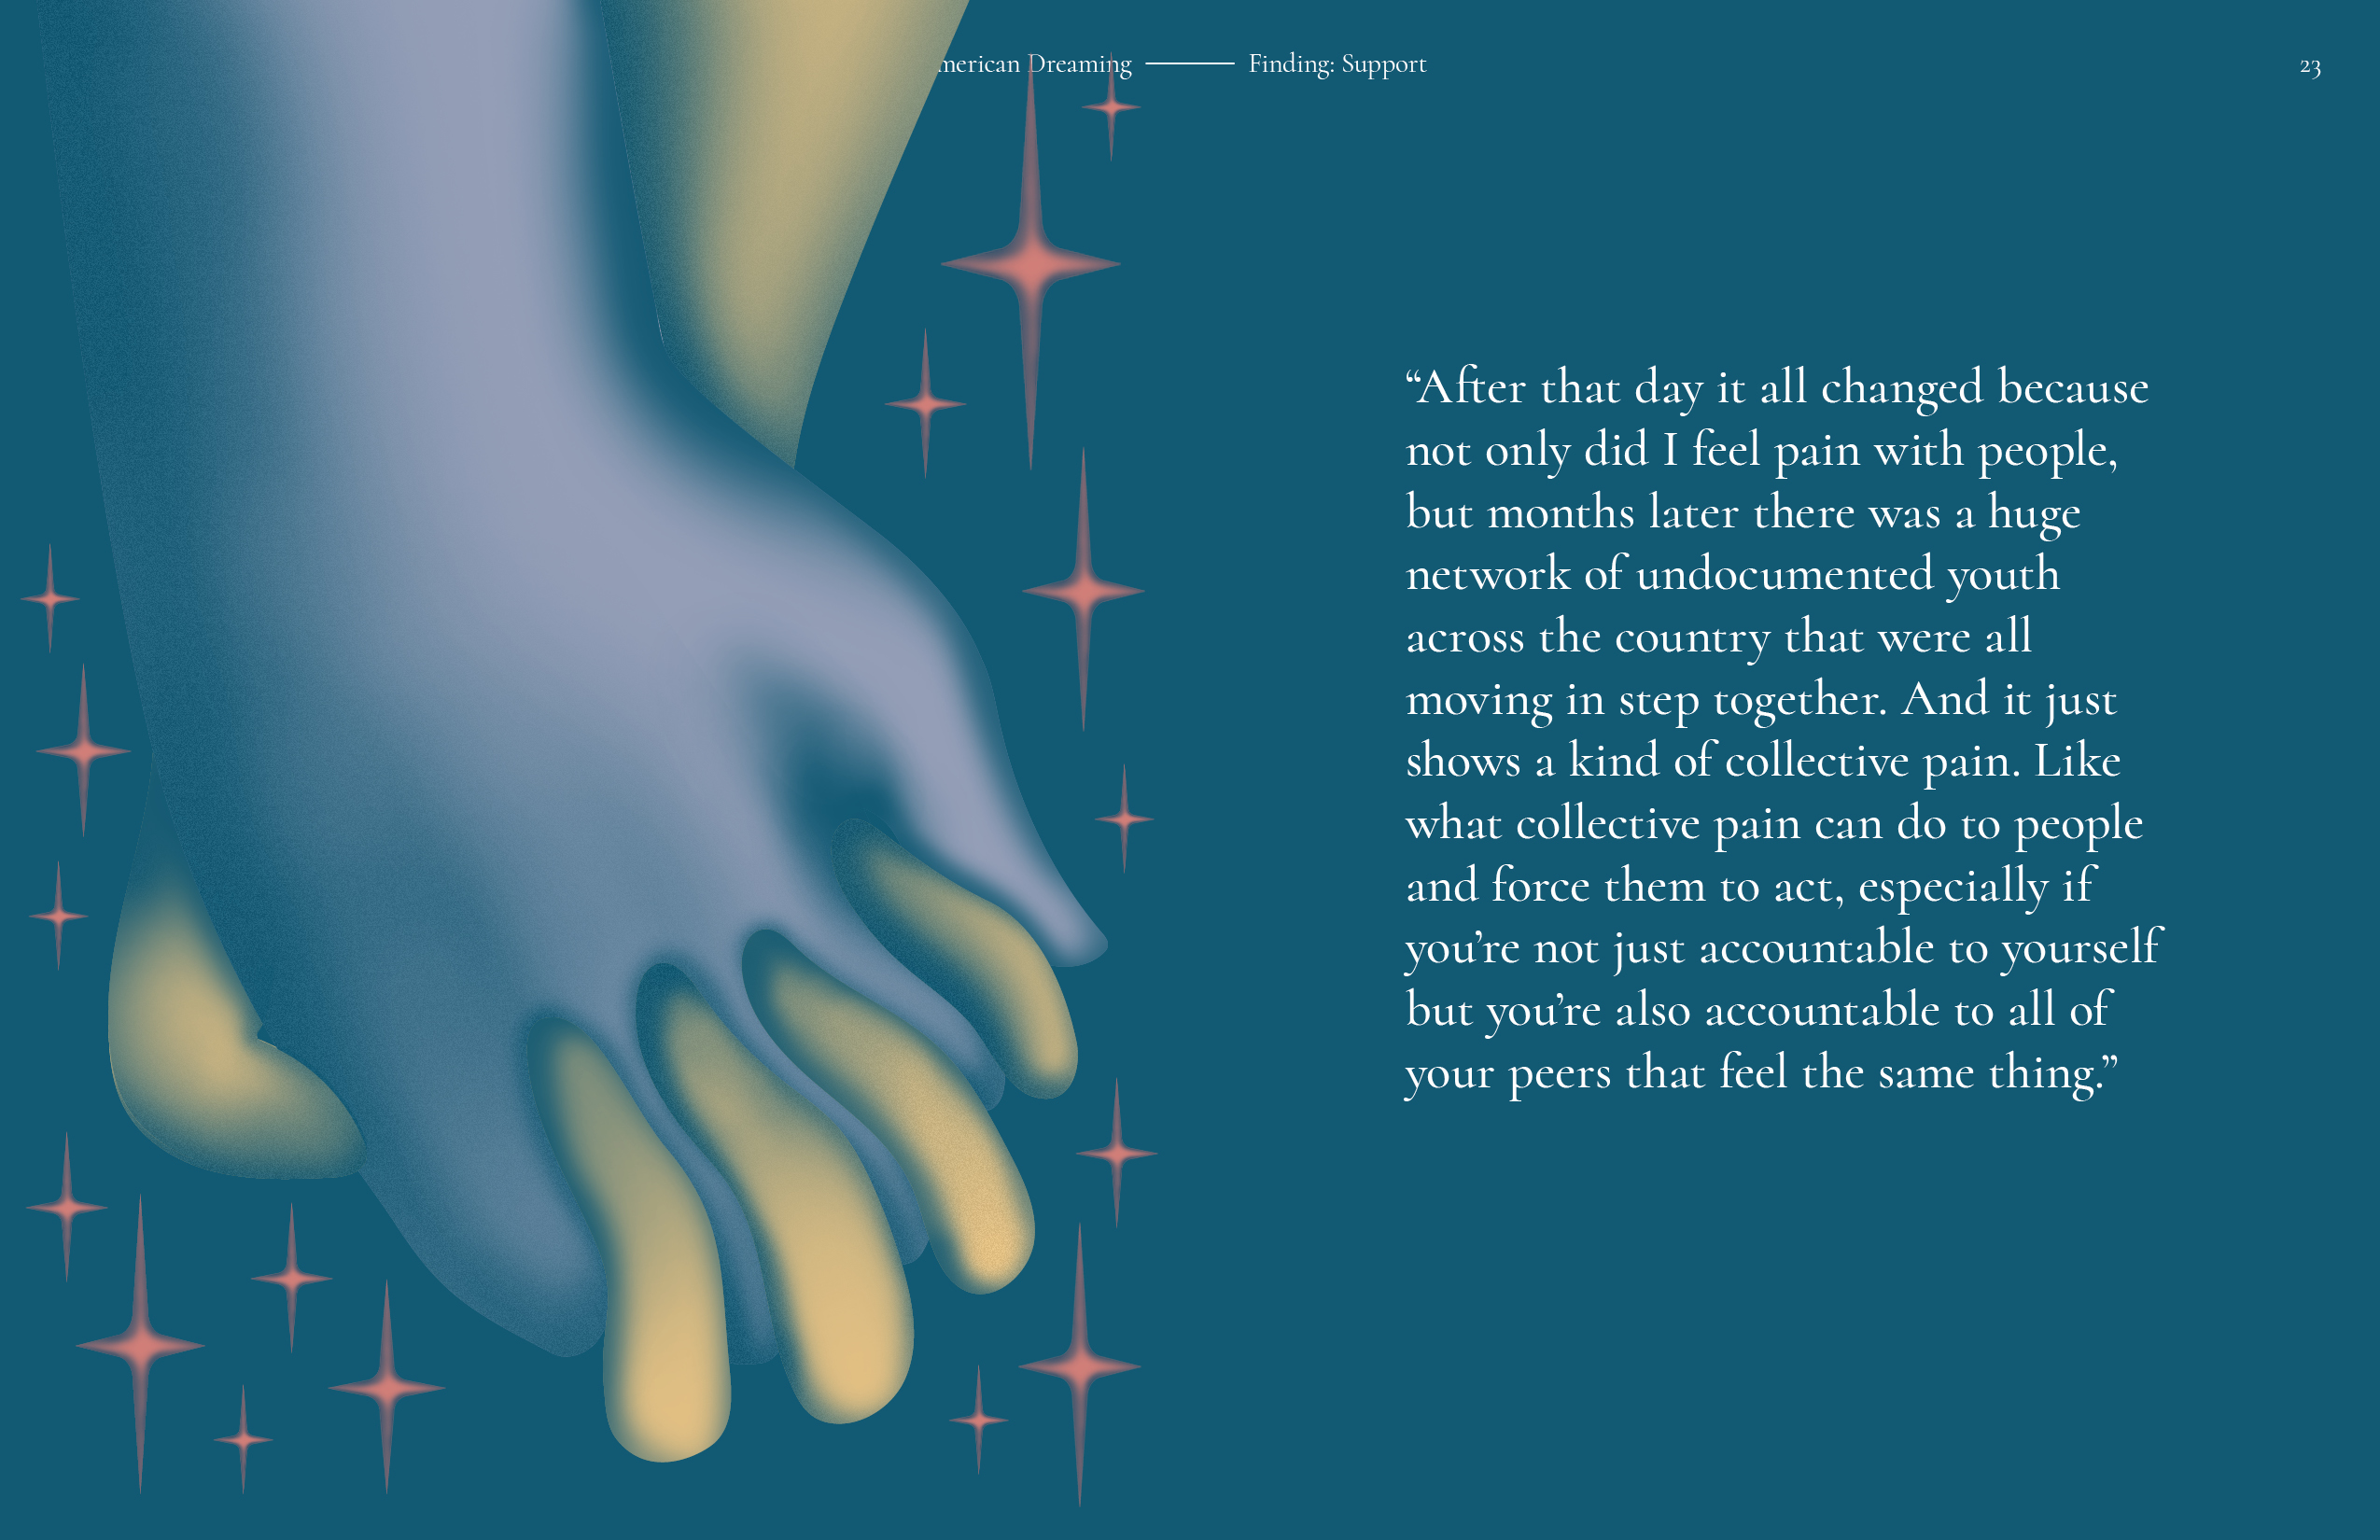 A spread with a deep blue-green background. On the left is an illustration of two hands holding each other, surrounded by little red sparks. On the right is the quote 'After that day it all changed because not only did I feel pain with people, but months later there was a huge network of undocumented youth across the country that were all moving in step together. And it just shows a kind of collective pain. Like what collective pain can do to people and force them to act, especially if you're not just accountable to yourself but you're also accountable to all of your peers that feel the same thing.'